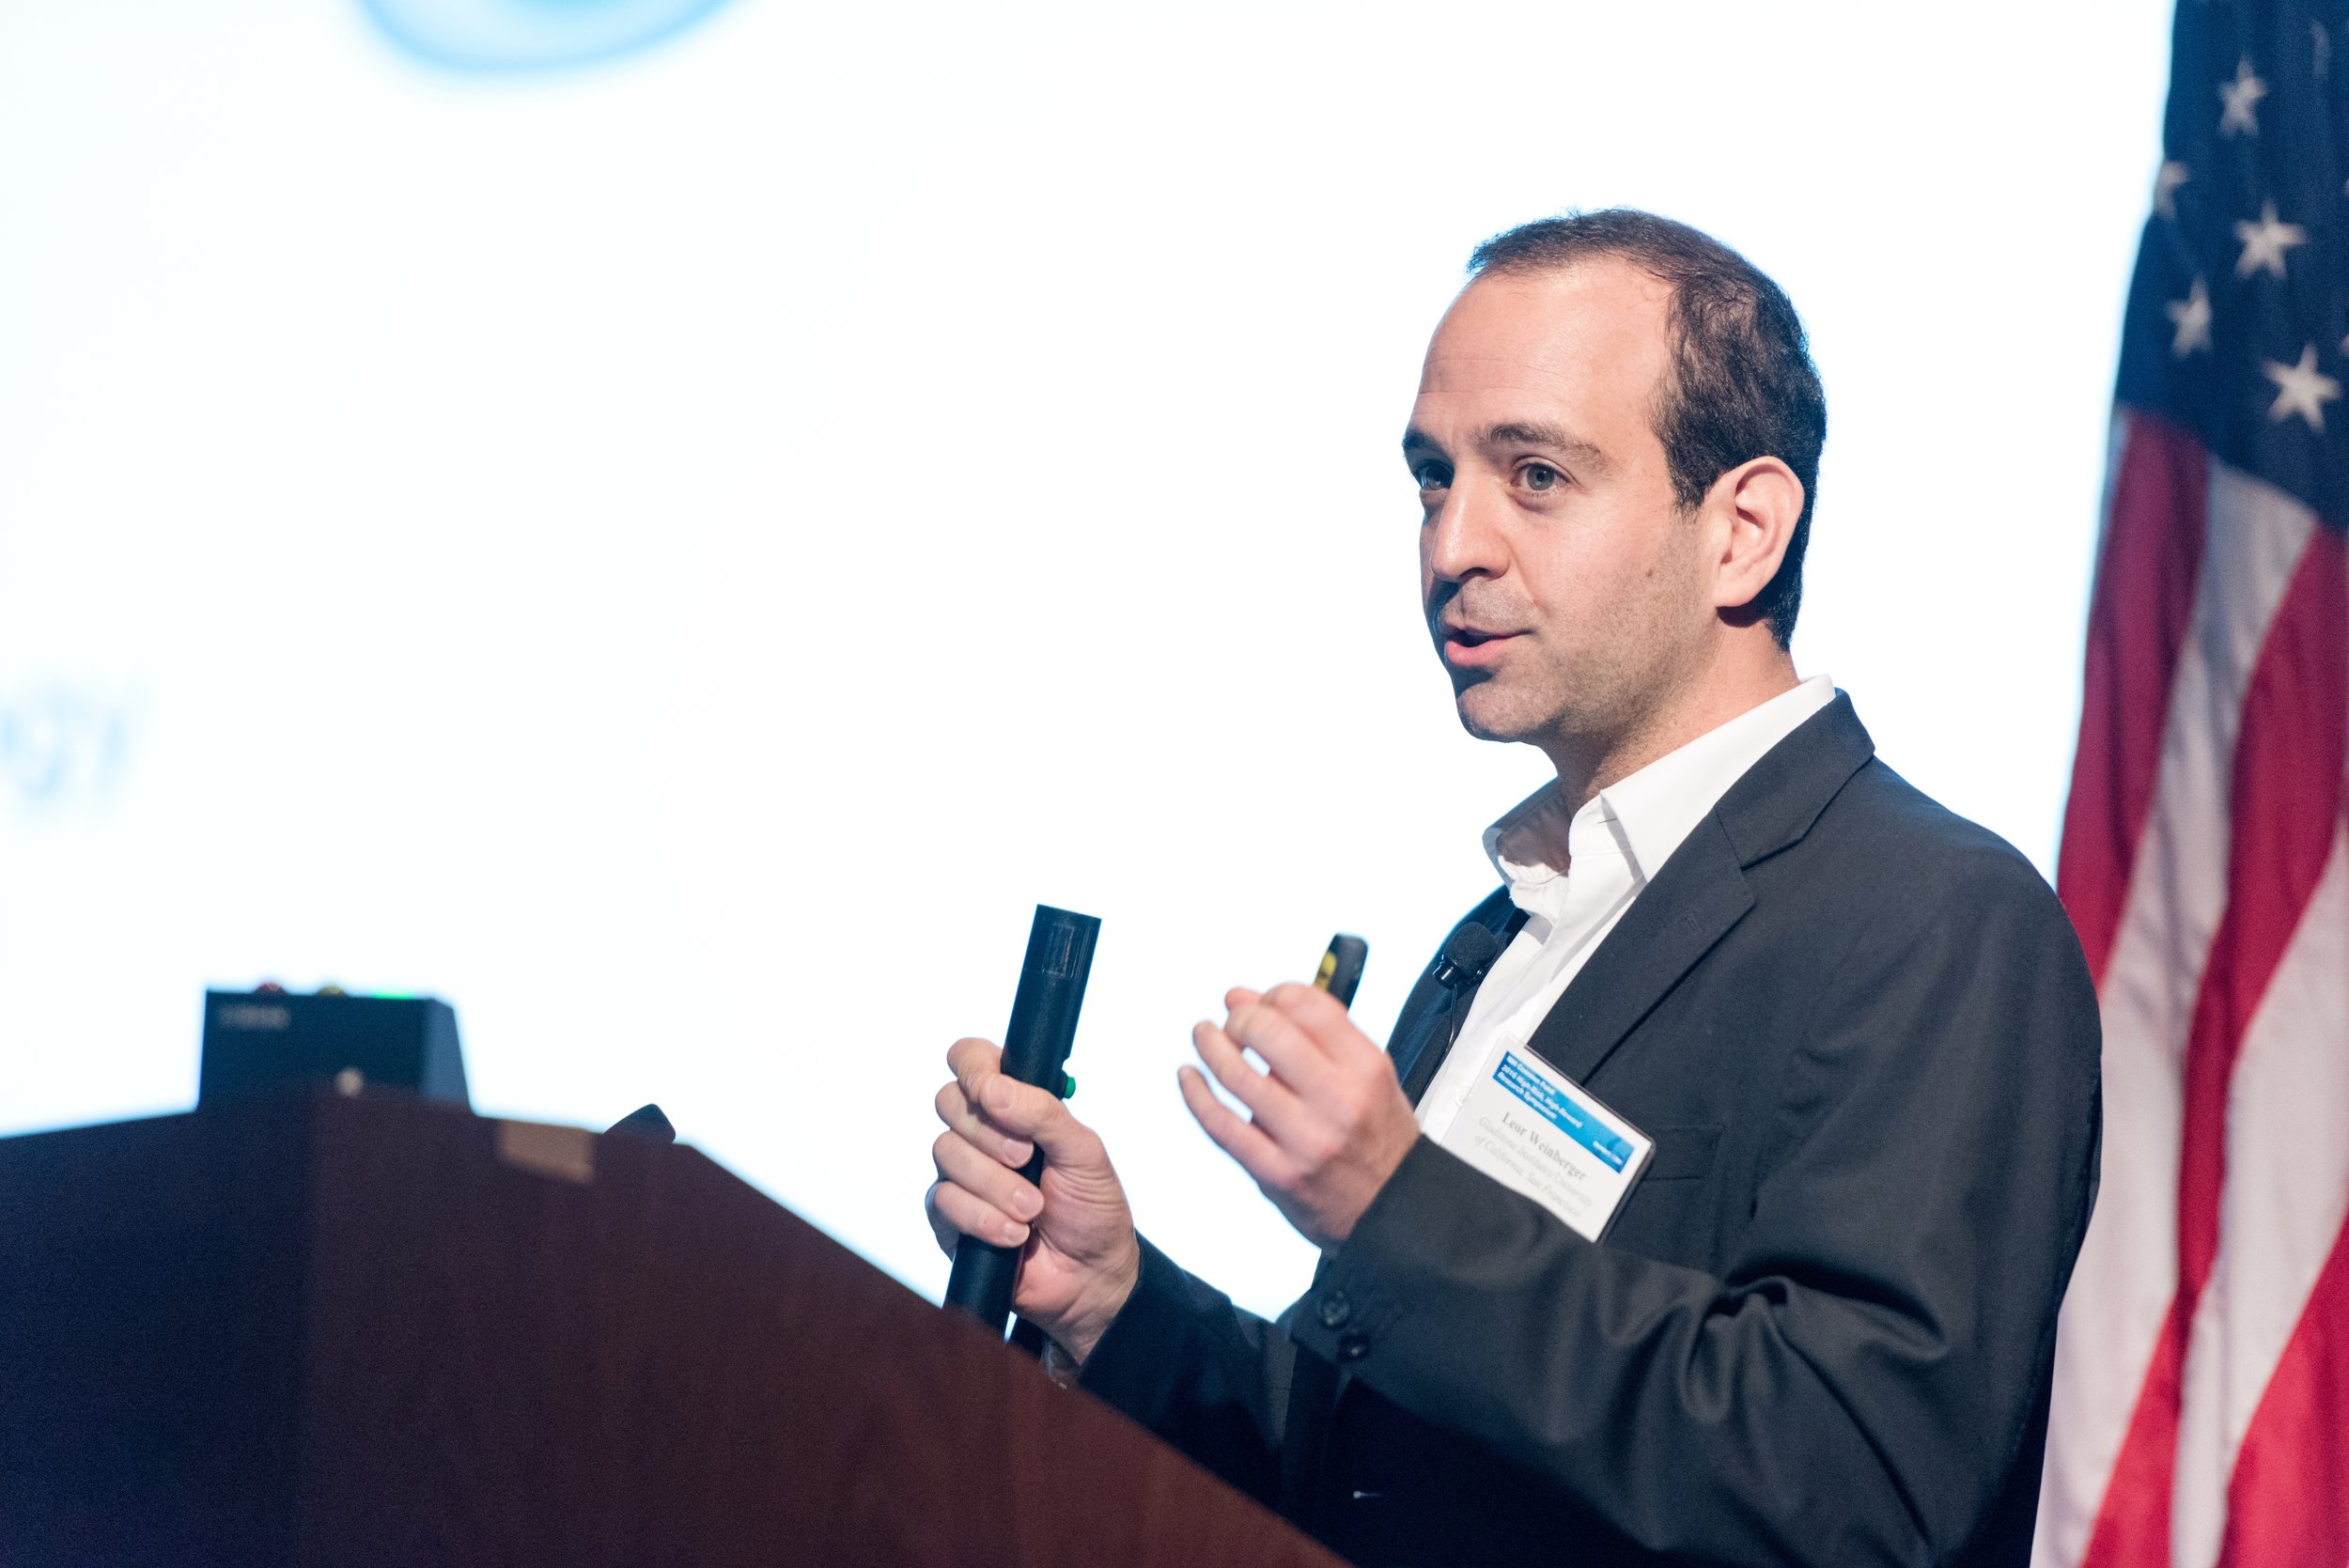  Leor giving a presentation at the 2016 NIH High-Risk, High-Reward Research Symposium. 